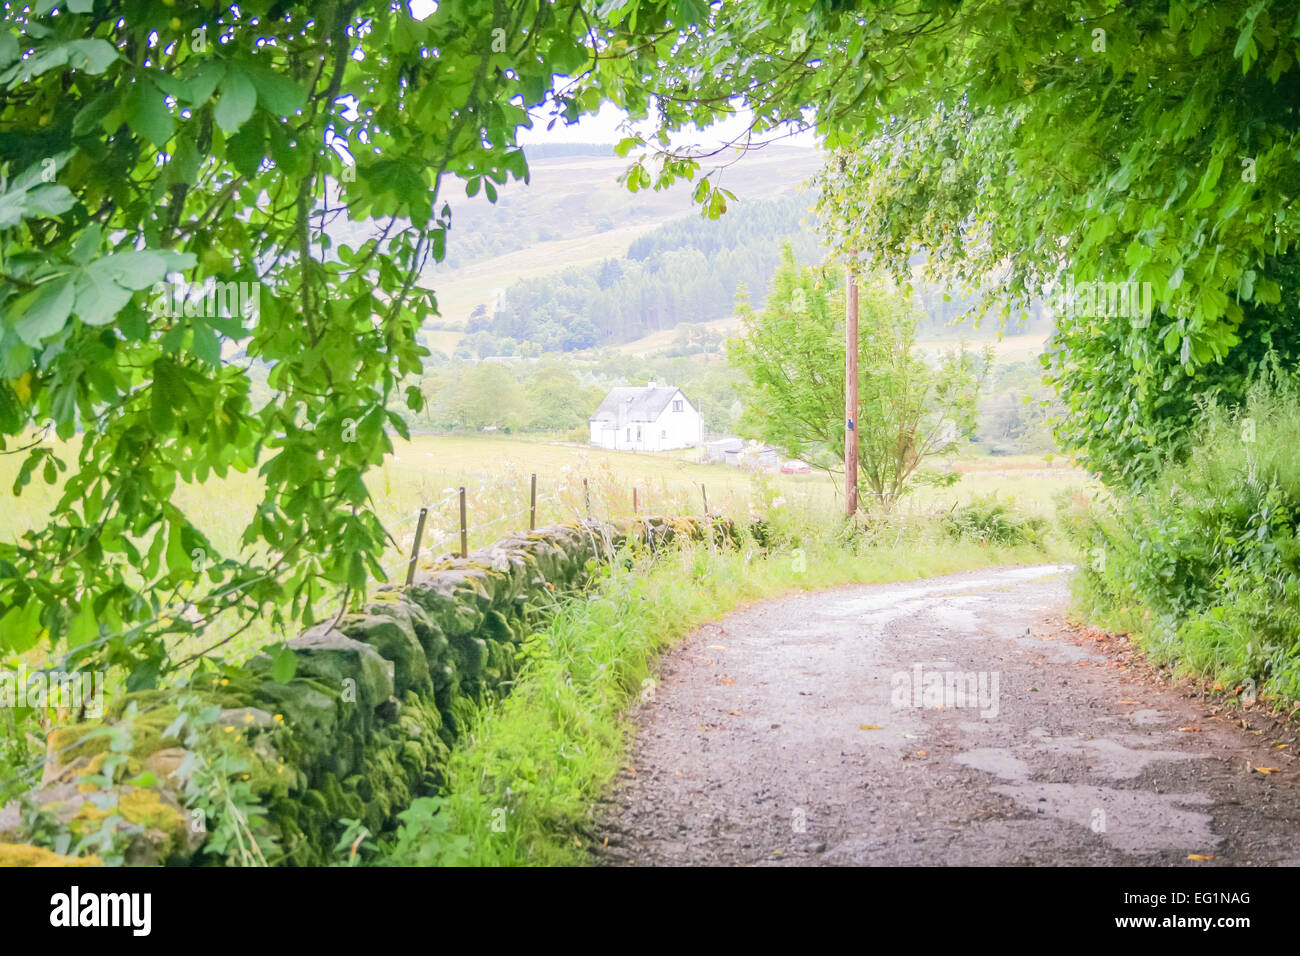 Scottish countryside . Road of Perthshire . Stock Photo